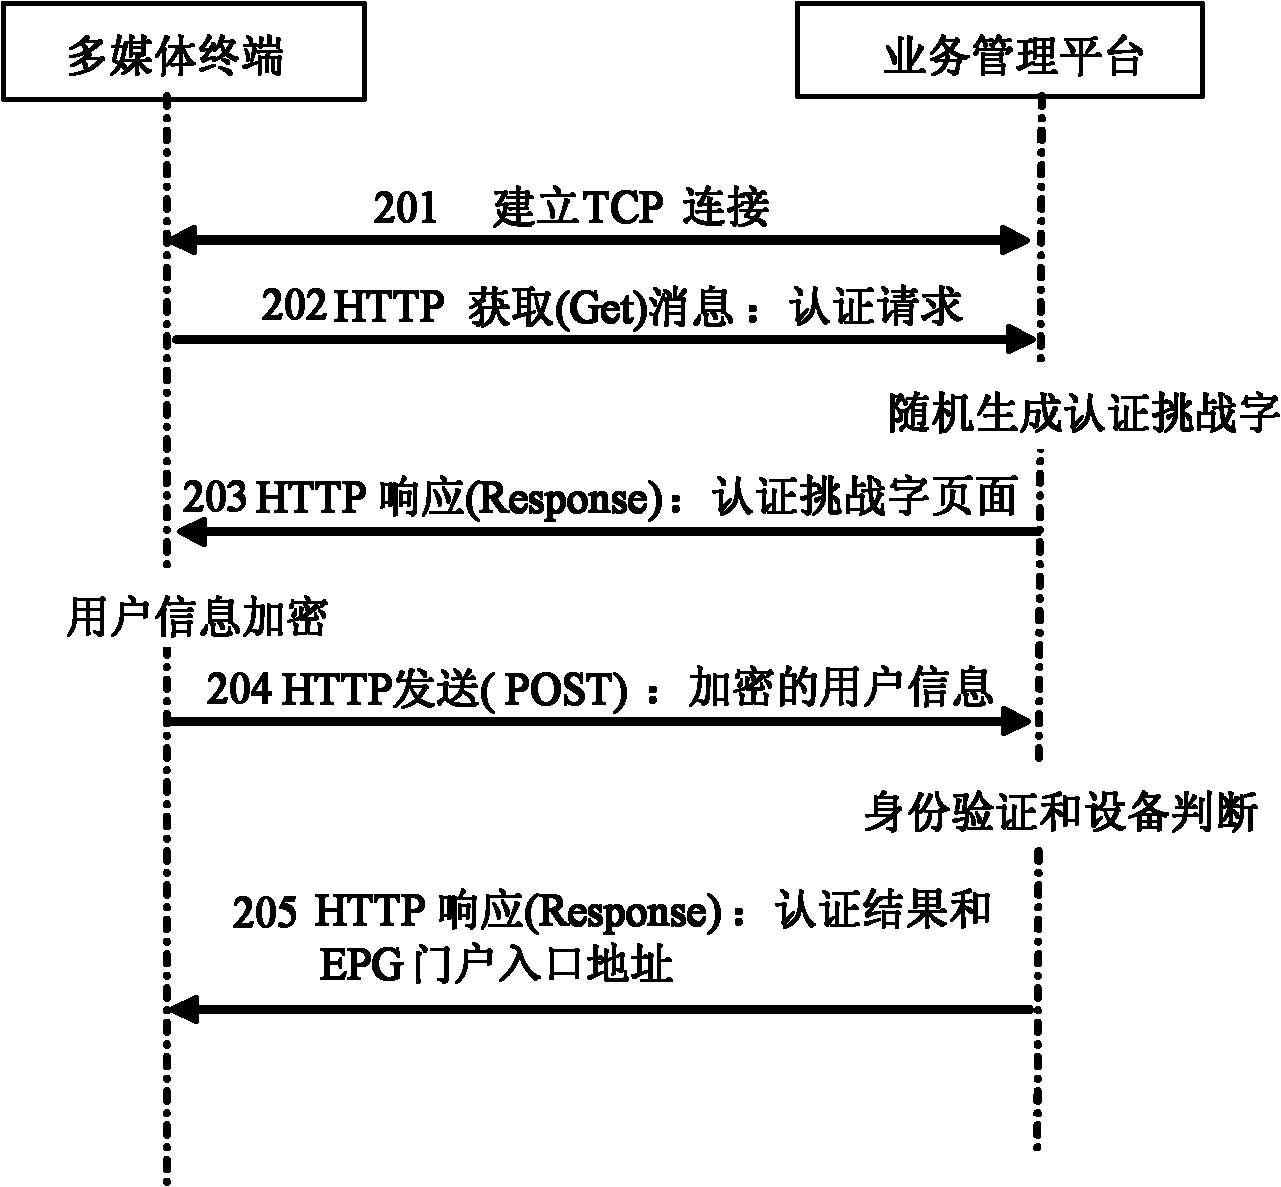 Method and system for realizing interaction between multi-media terminal and internet protocol (IP) set top box